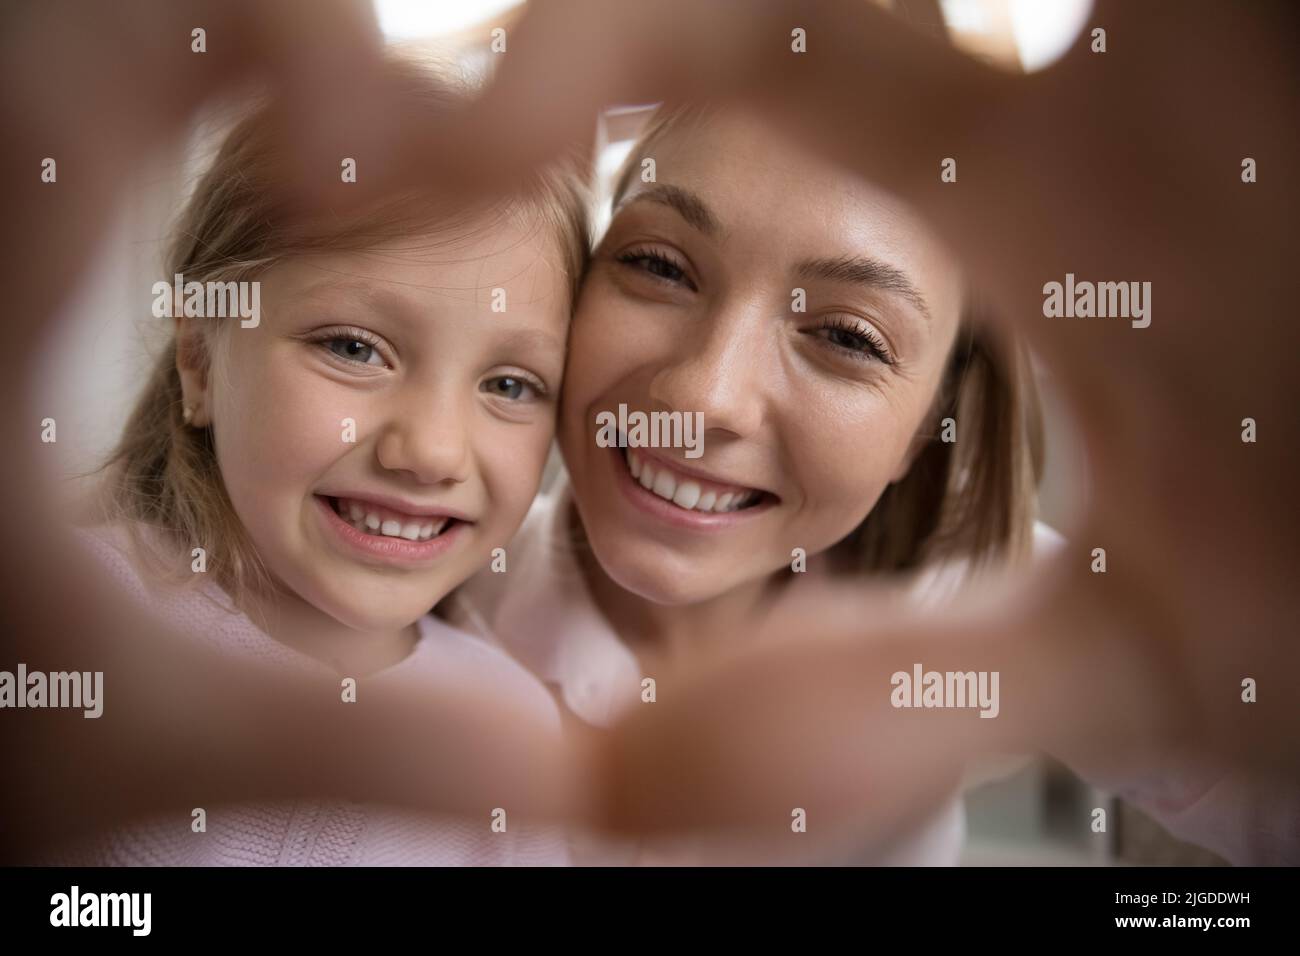 Joyful happy mom and pretty daughter kid with toothy smile Stock Photo